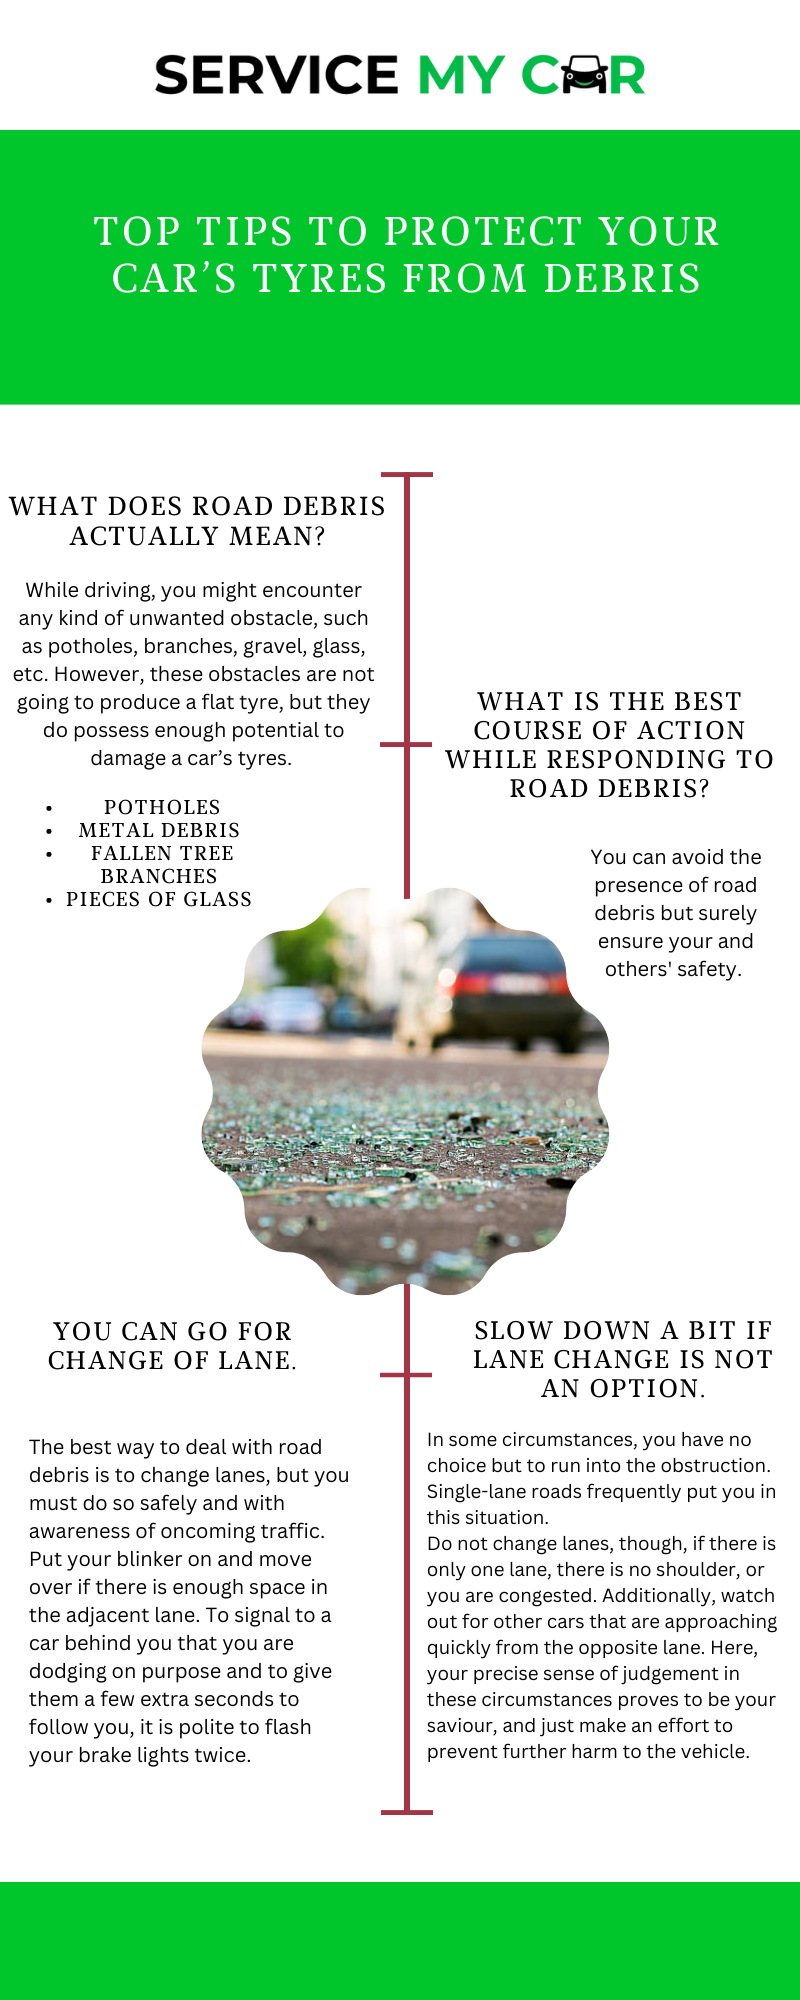 Top_Tips_to_Protect_Your_Cars_Tyres_from_Debris.png